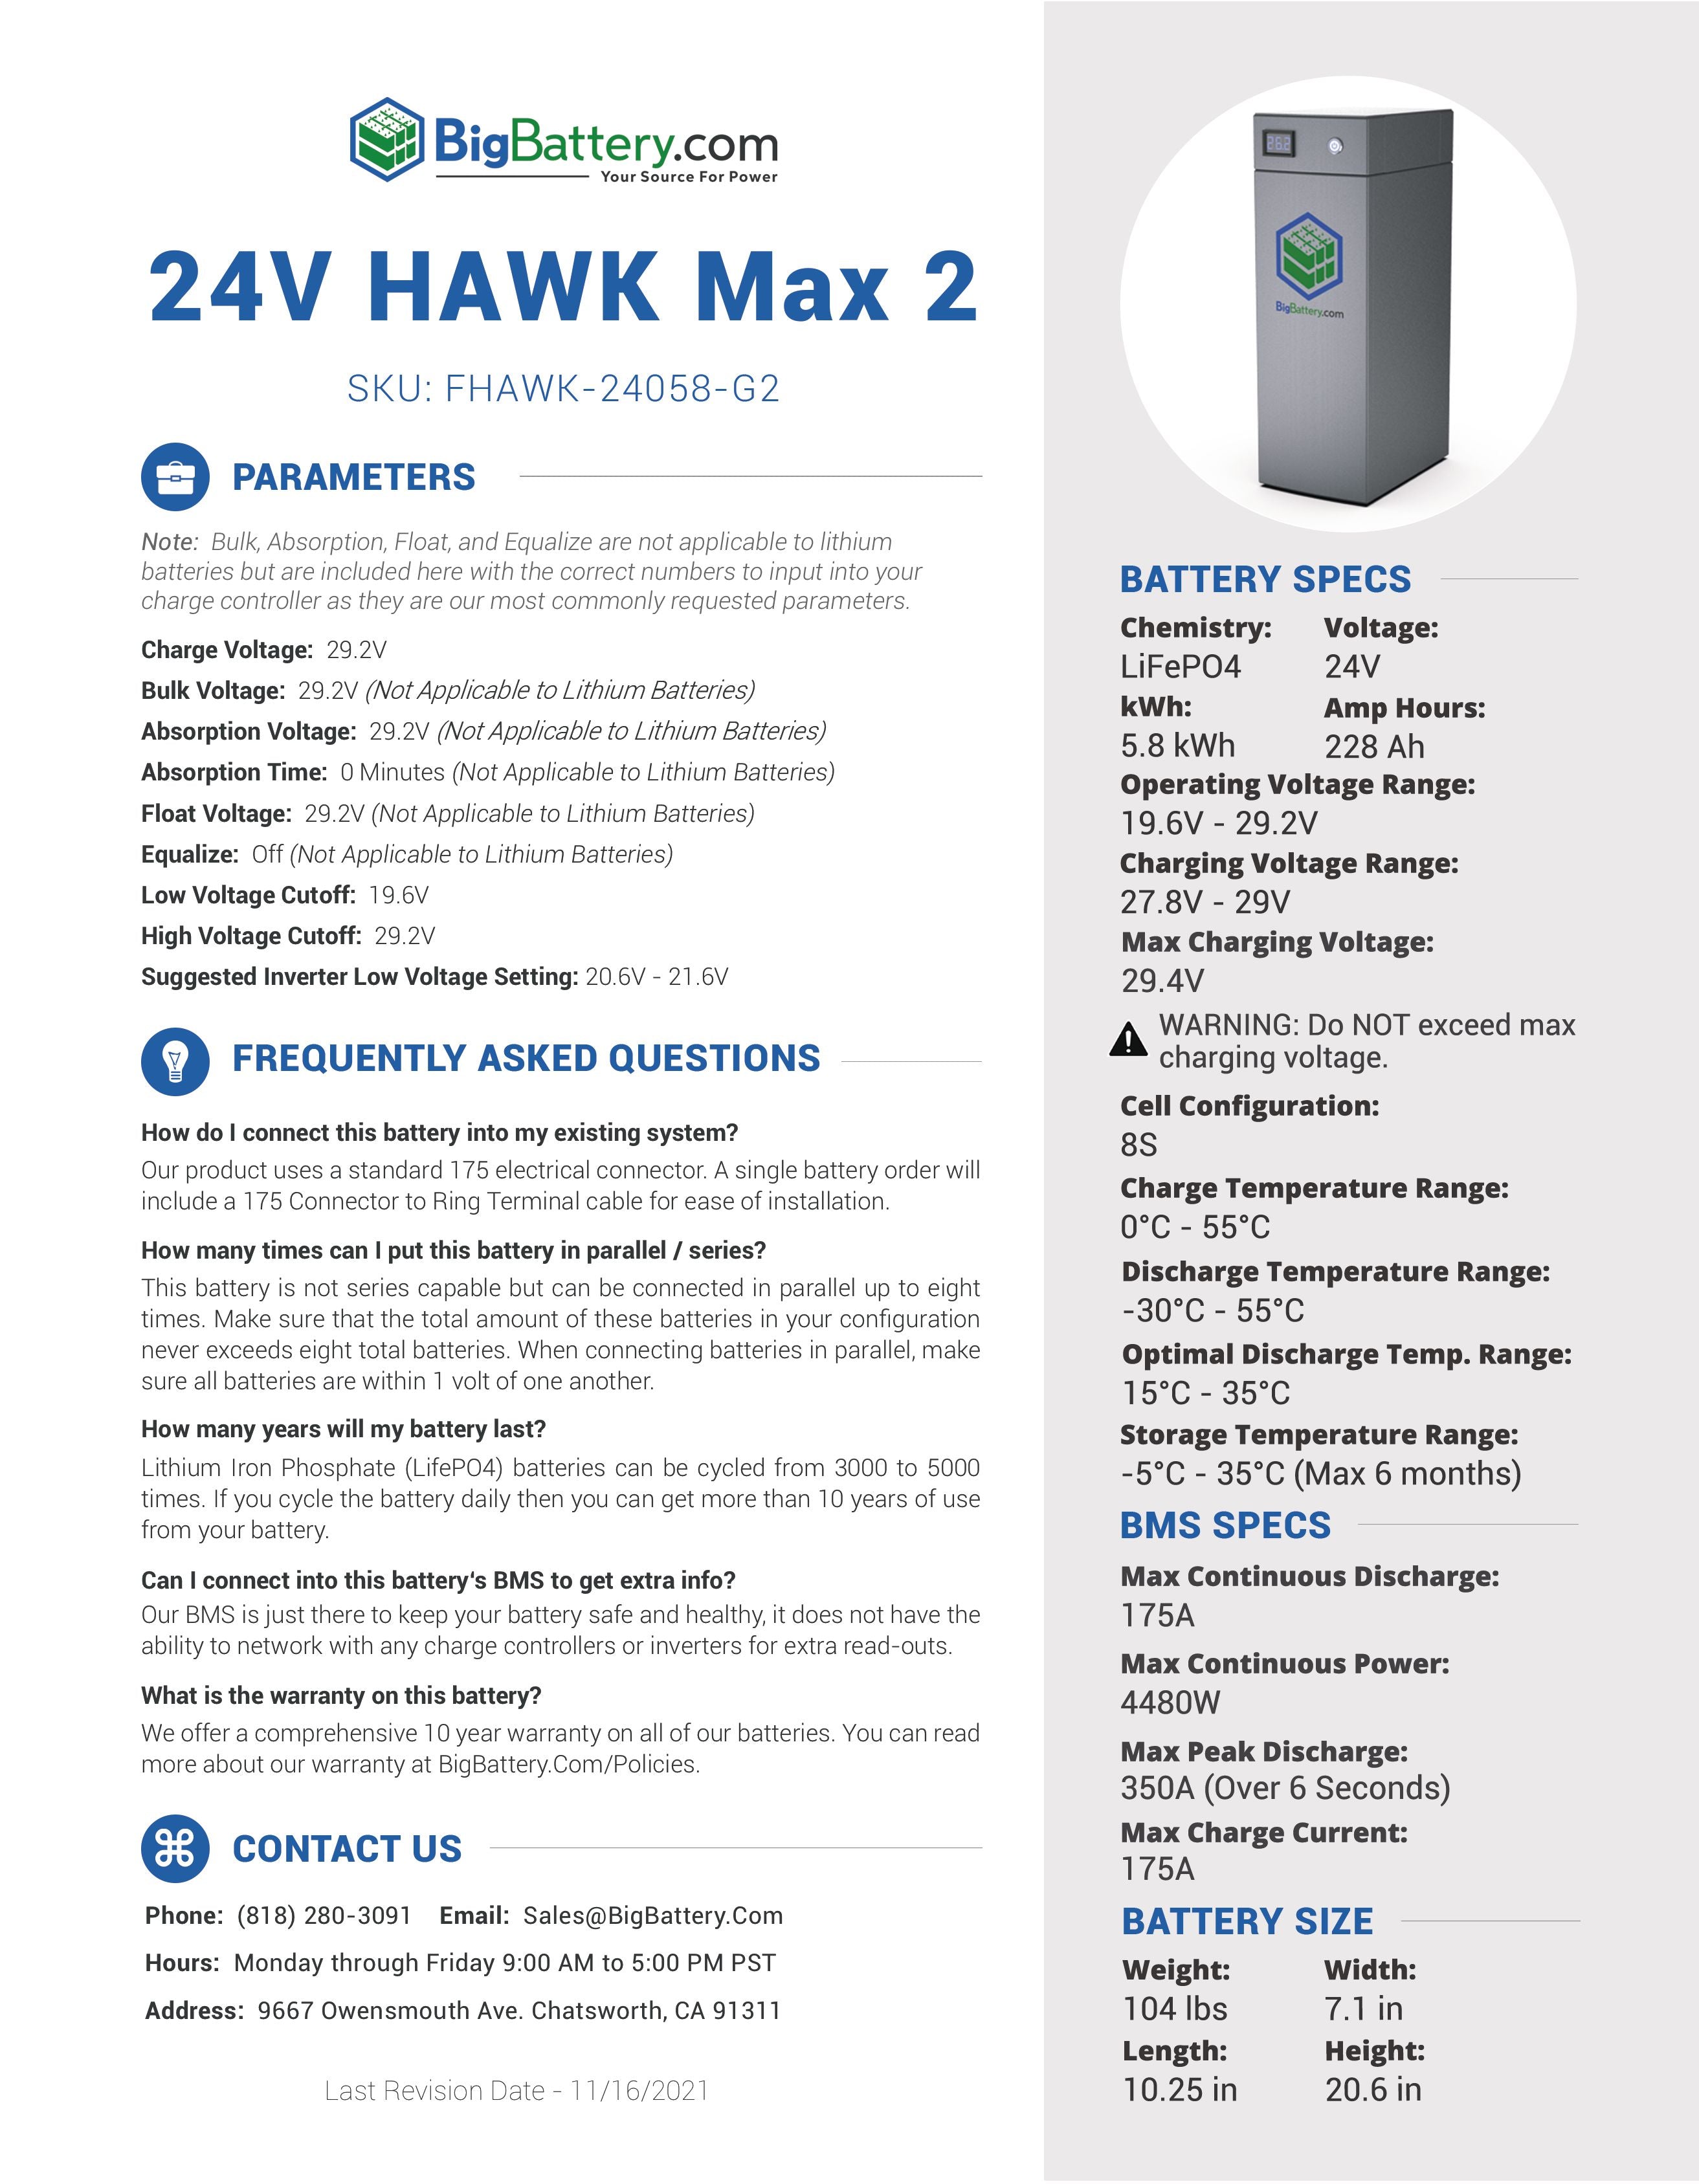 24V HAWK MAX 2 | 228Ah | 5.8kWh | LIFEPO4 Power Block | Lithium Battery Pack｜Ships in 3-7 Weeks From The USA